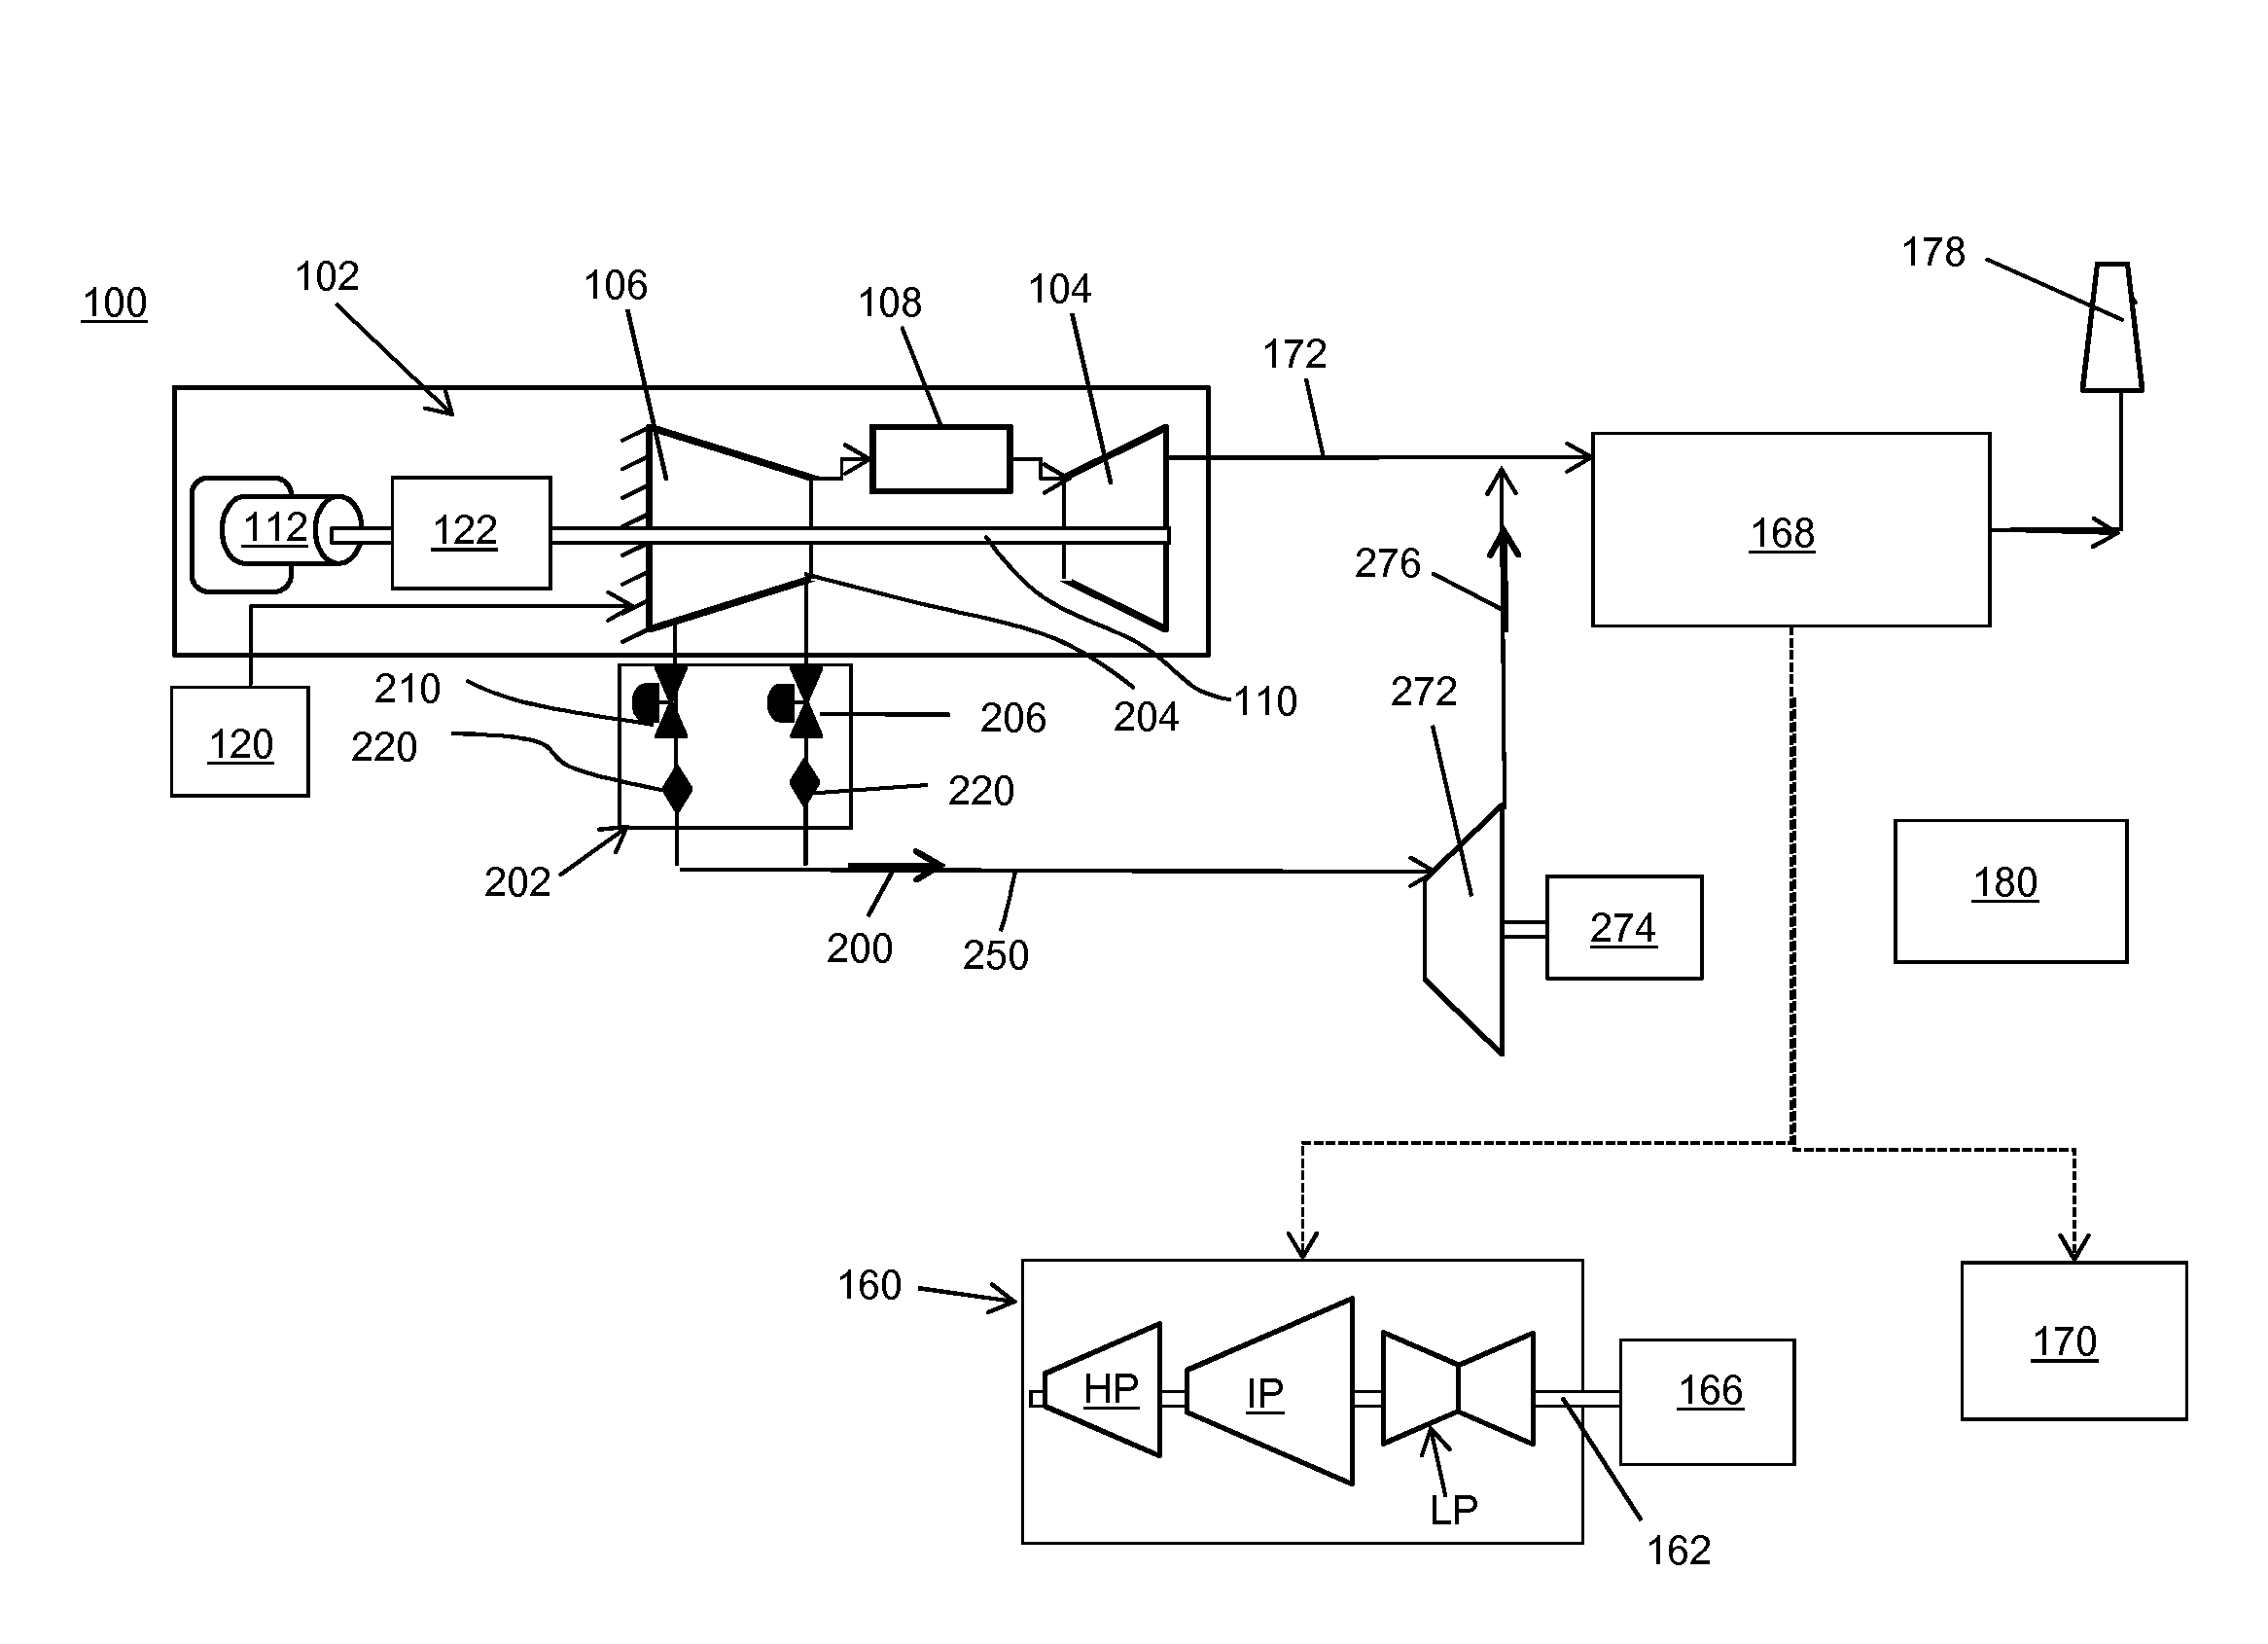 Power generation system having compressor creating excess air flow and turbo-expander for supplemental generator